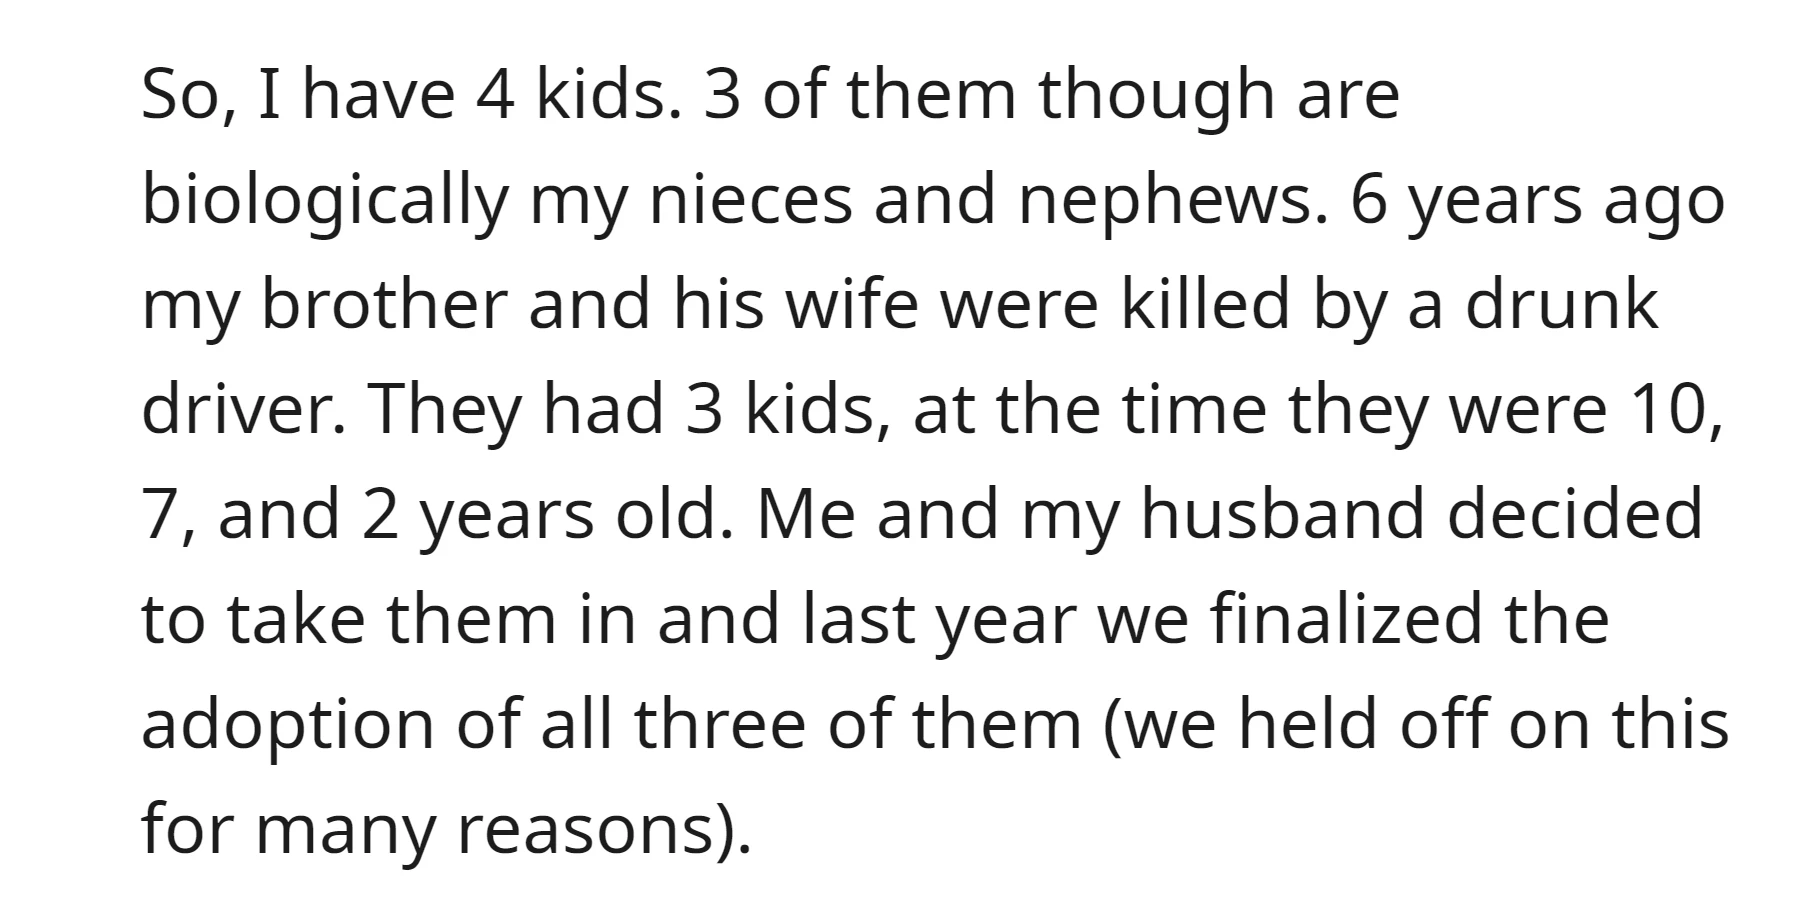 OP and her husband adopted her nieces and nephews